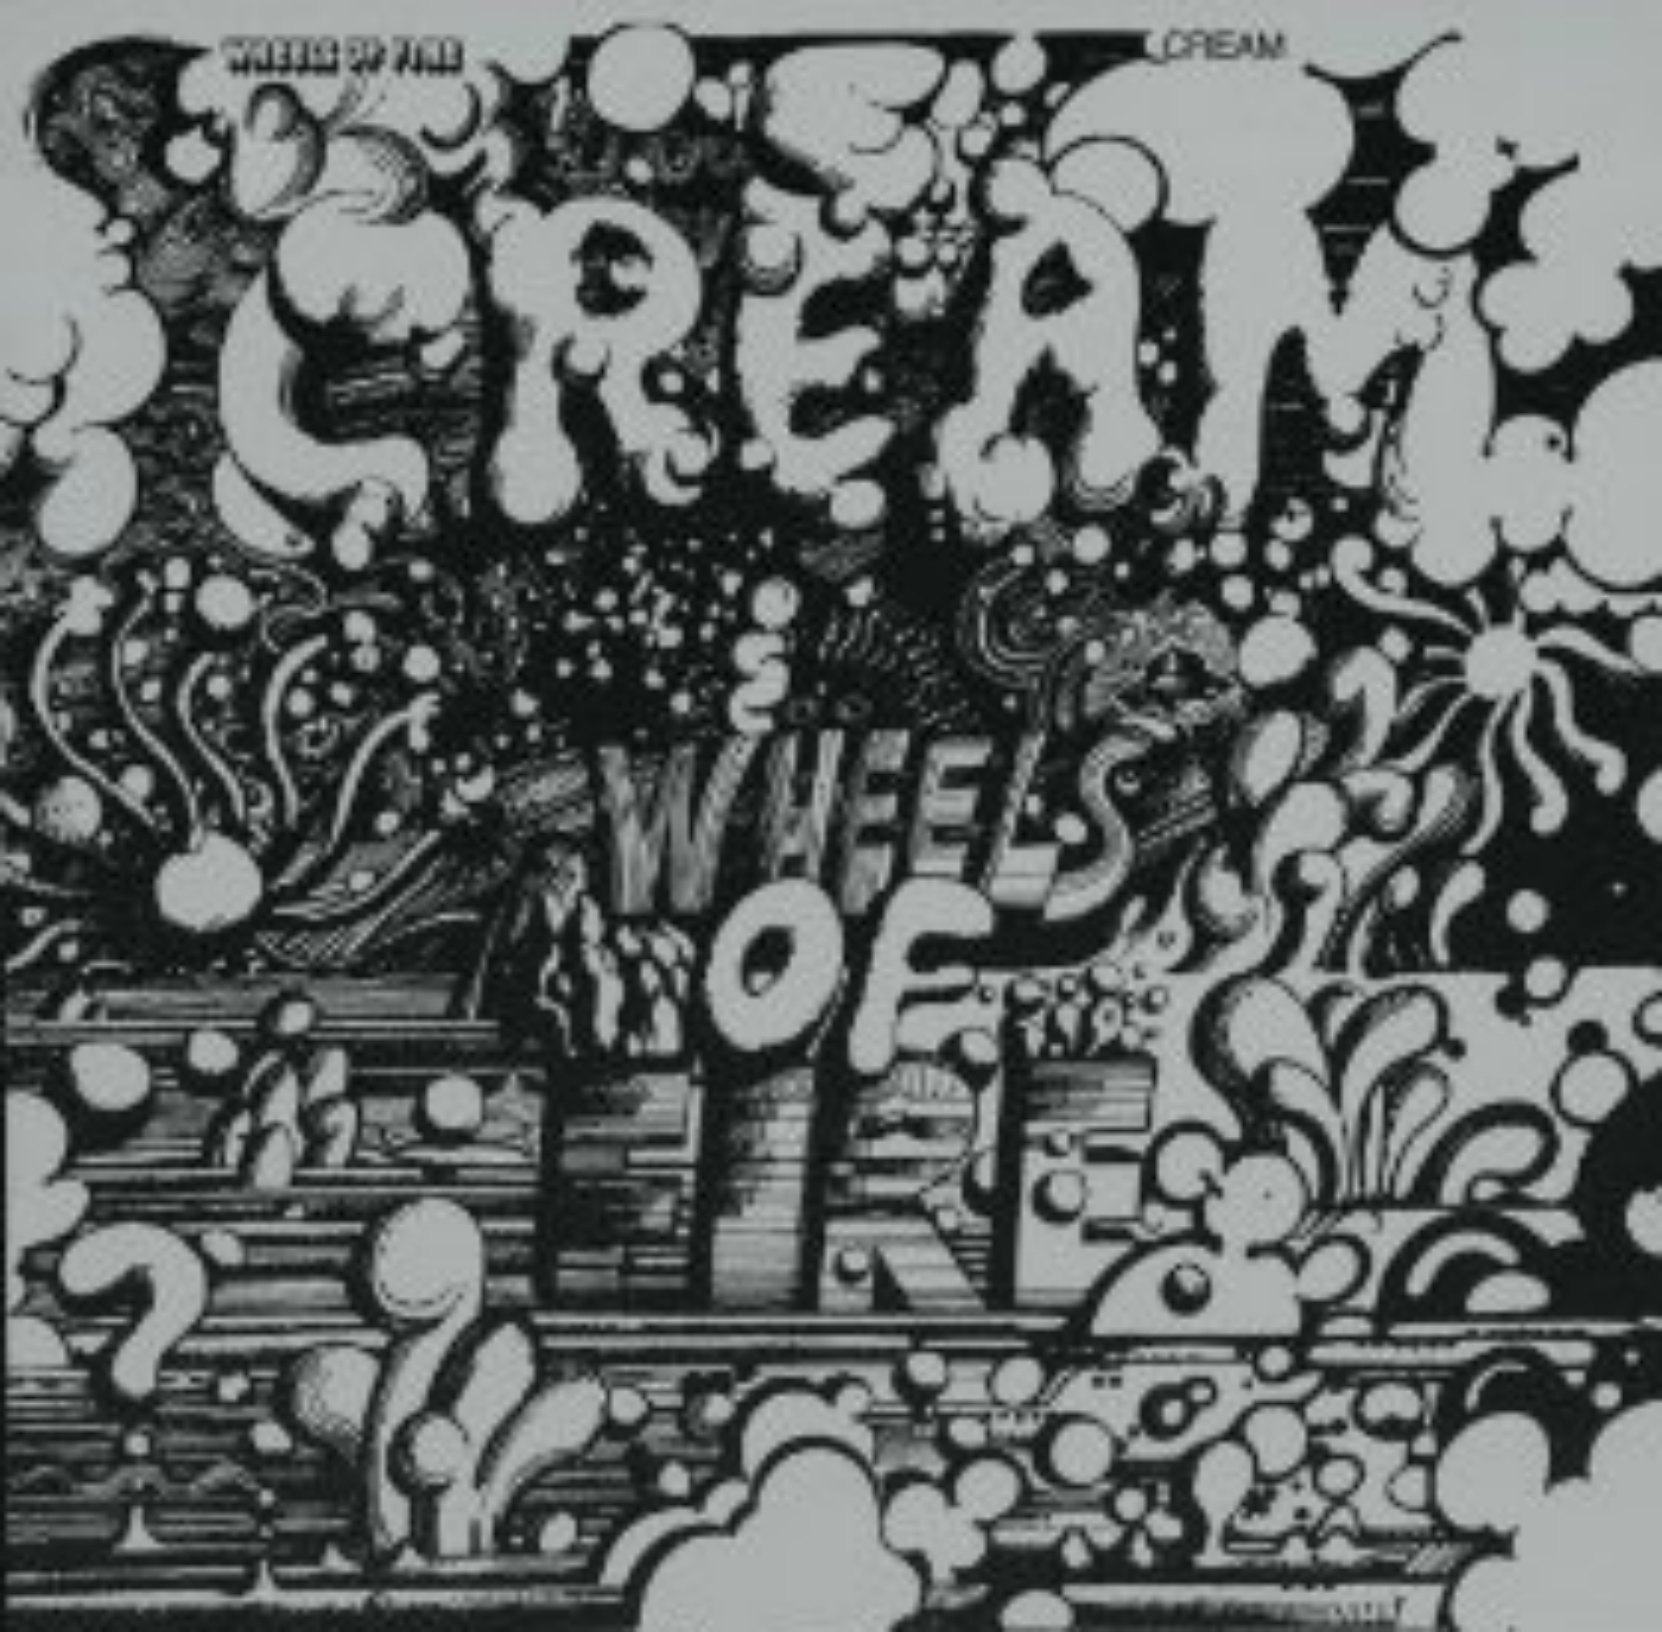 Cream, Wheels of Fire, album cover. Released in 1968 this album contained covers of several classic blues songs.